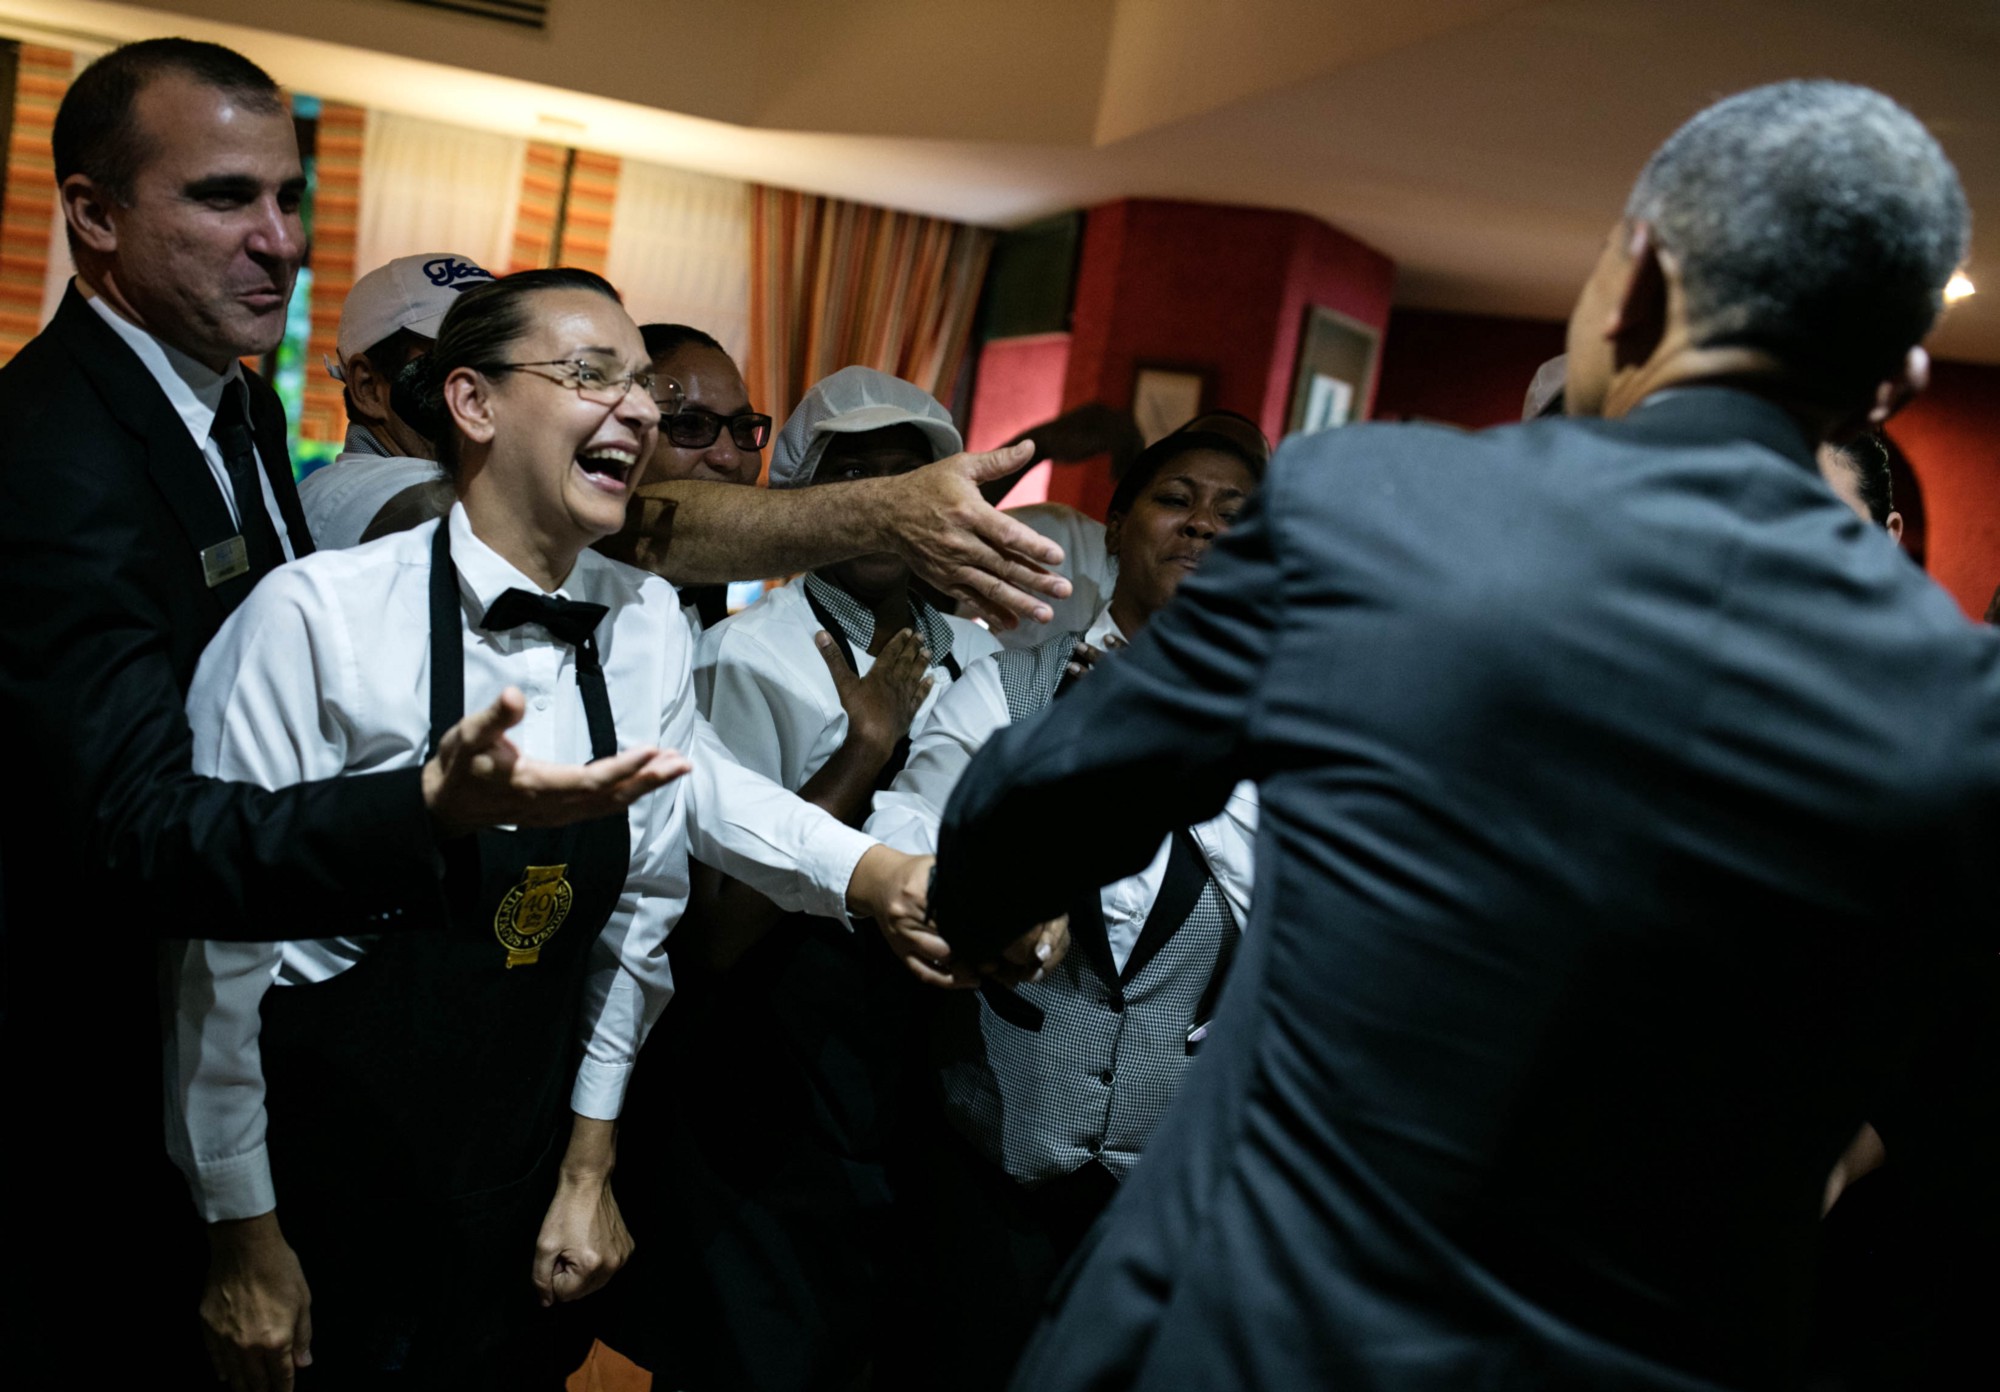 This photo released by the White House shows President Barack Obama greeting hotel workers in Havana on March 20, 2016.